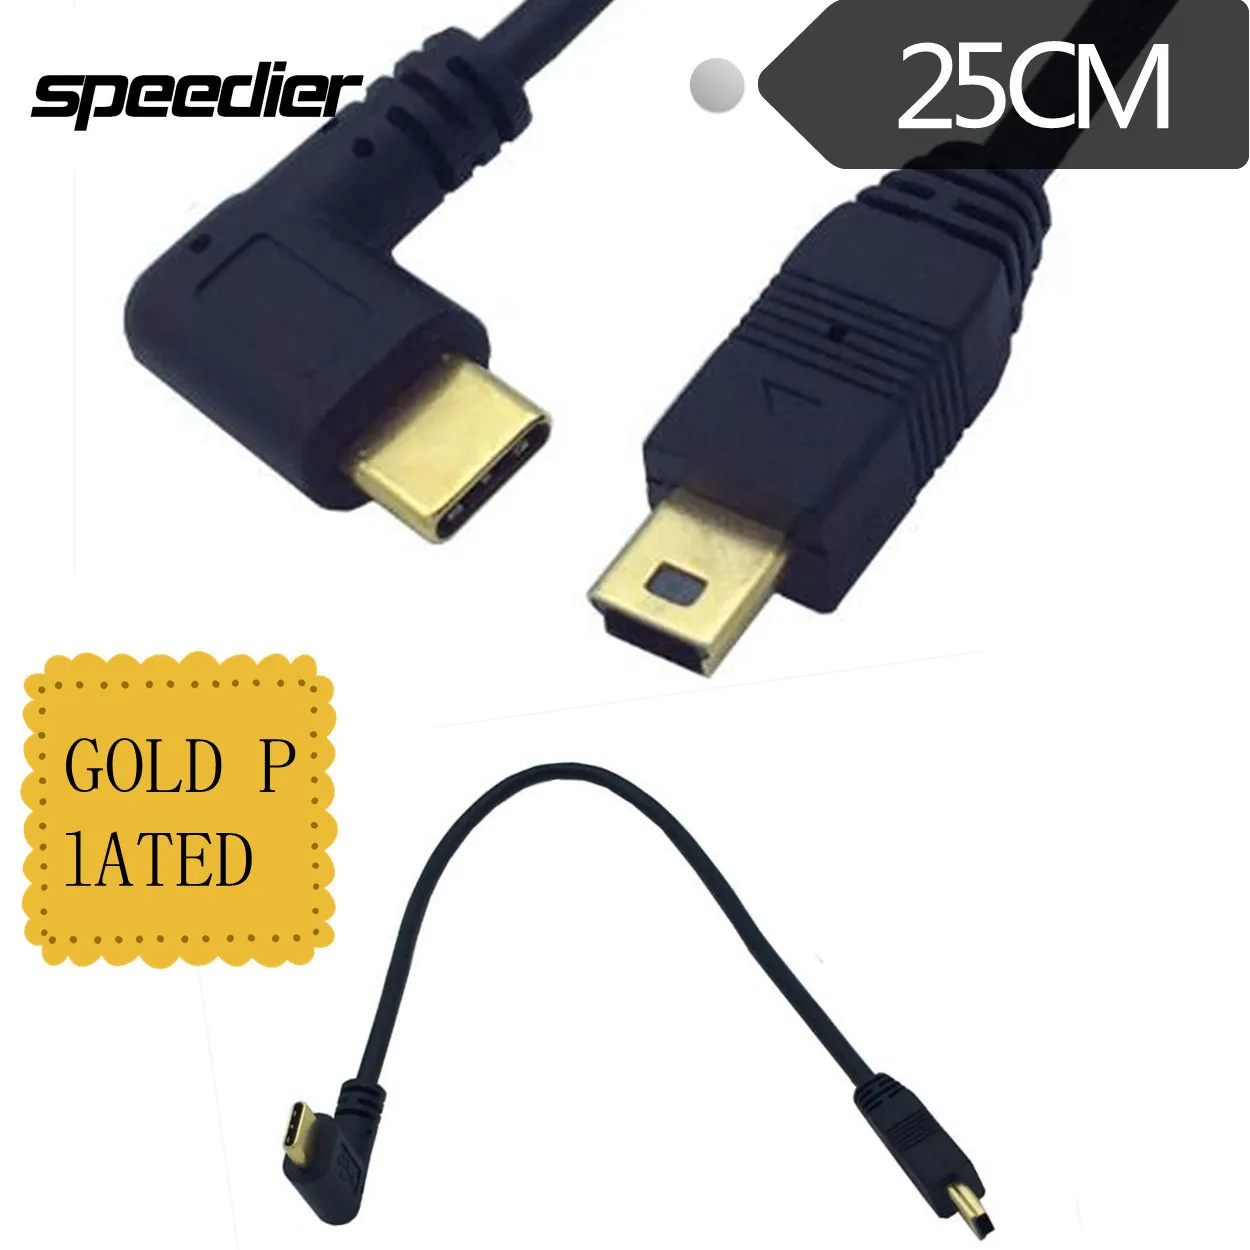 

Gold Plated USB 3.1 Type C Male To Mini USB 2.0 Mini Male Data Sync Power Supply Charging Cable Cord 0.25m 25cm